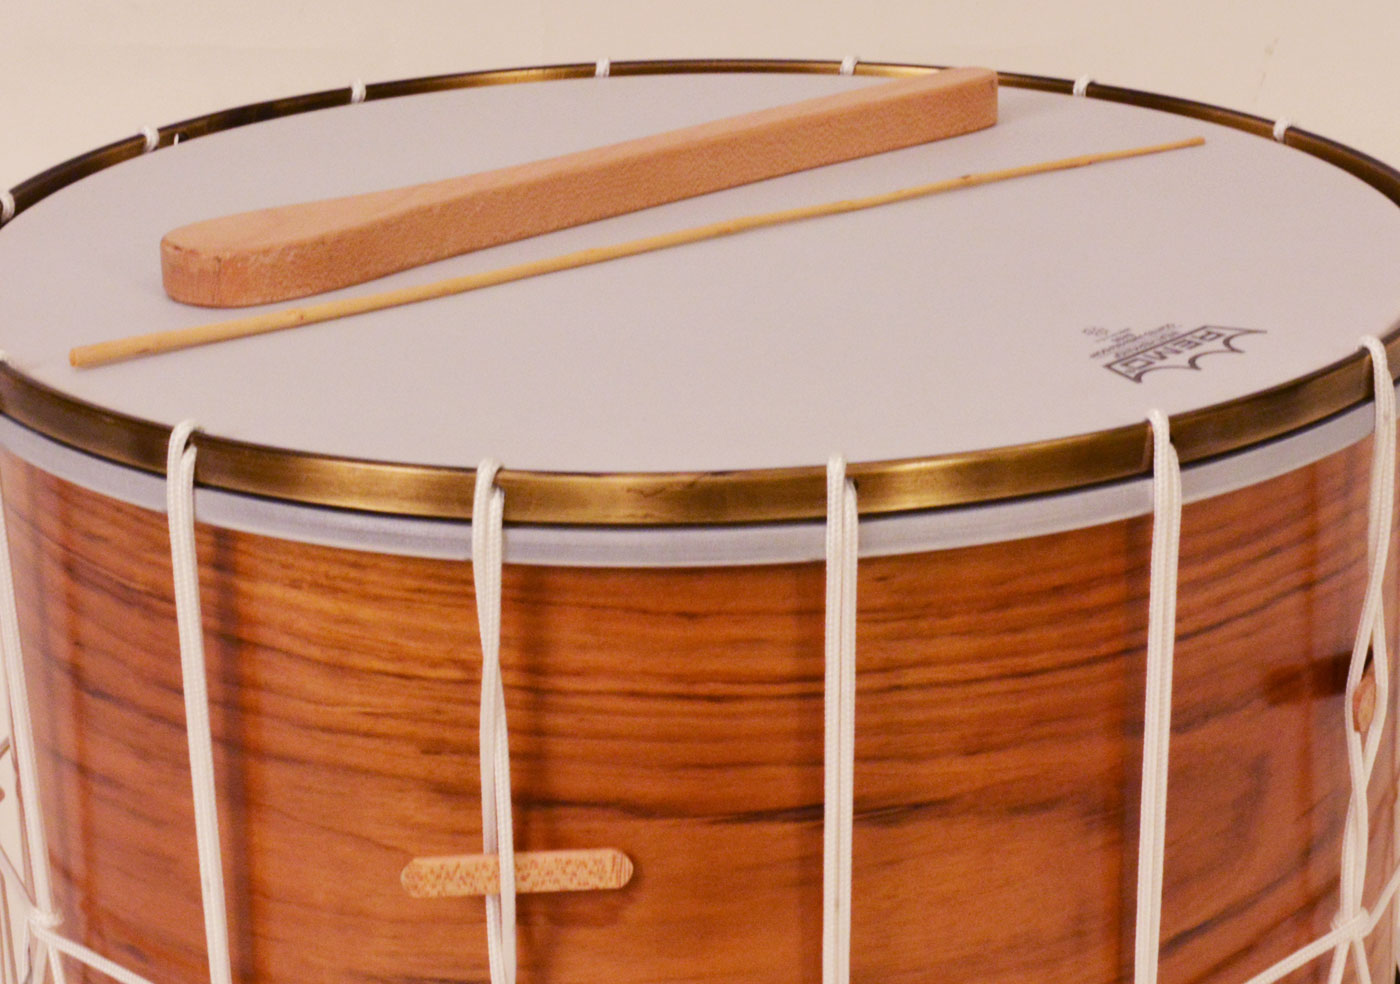 Traditional Hellenic Drums